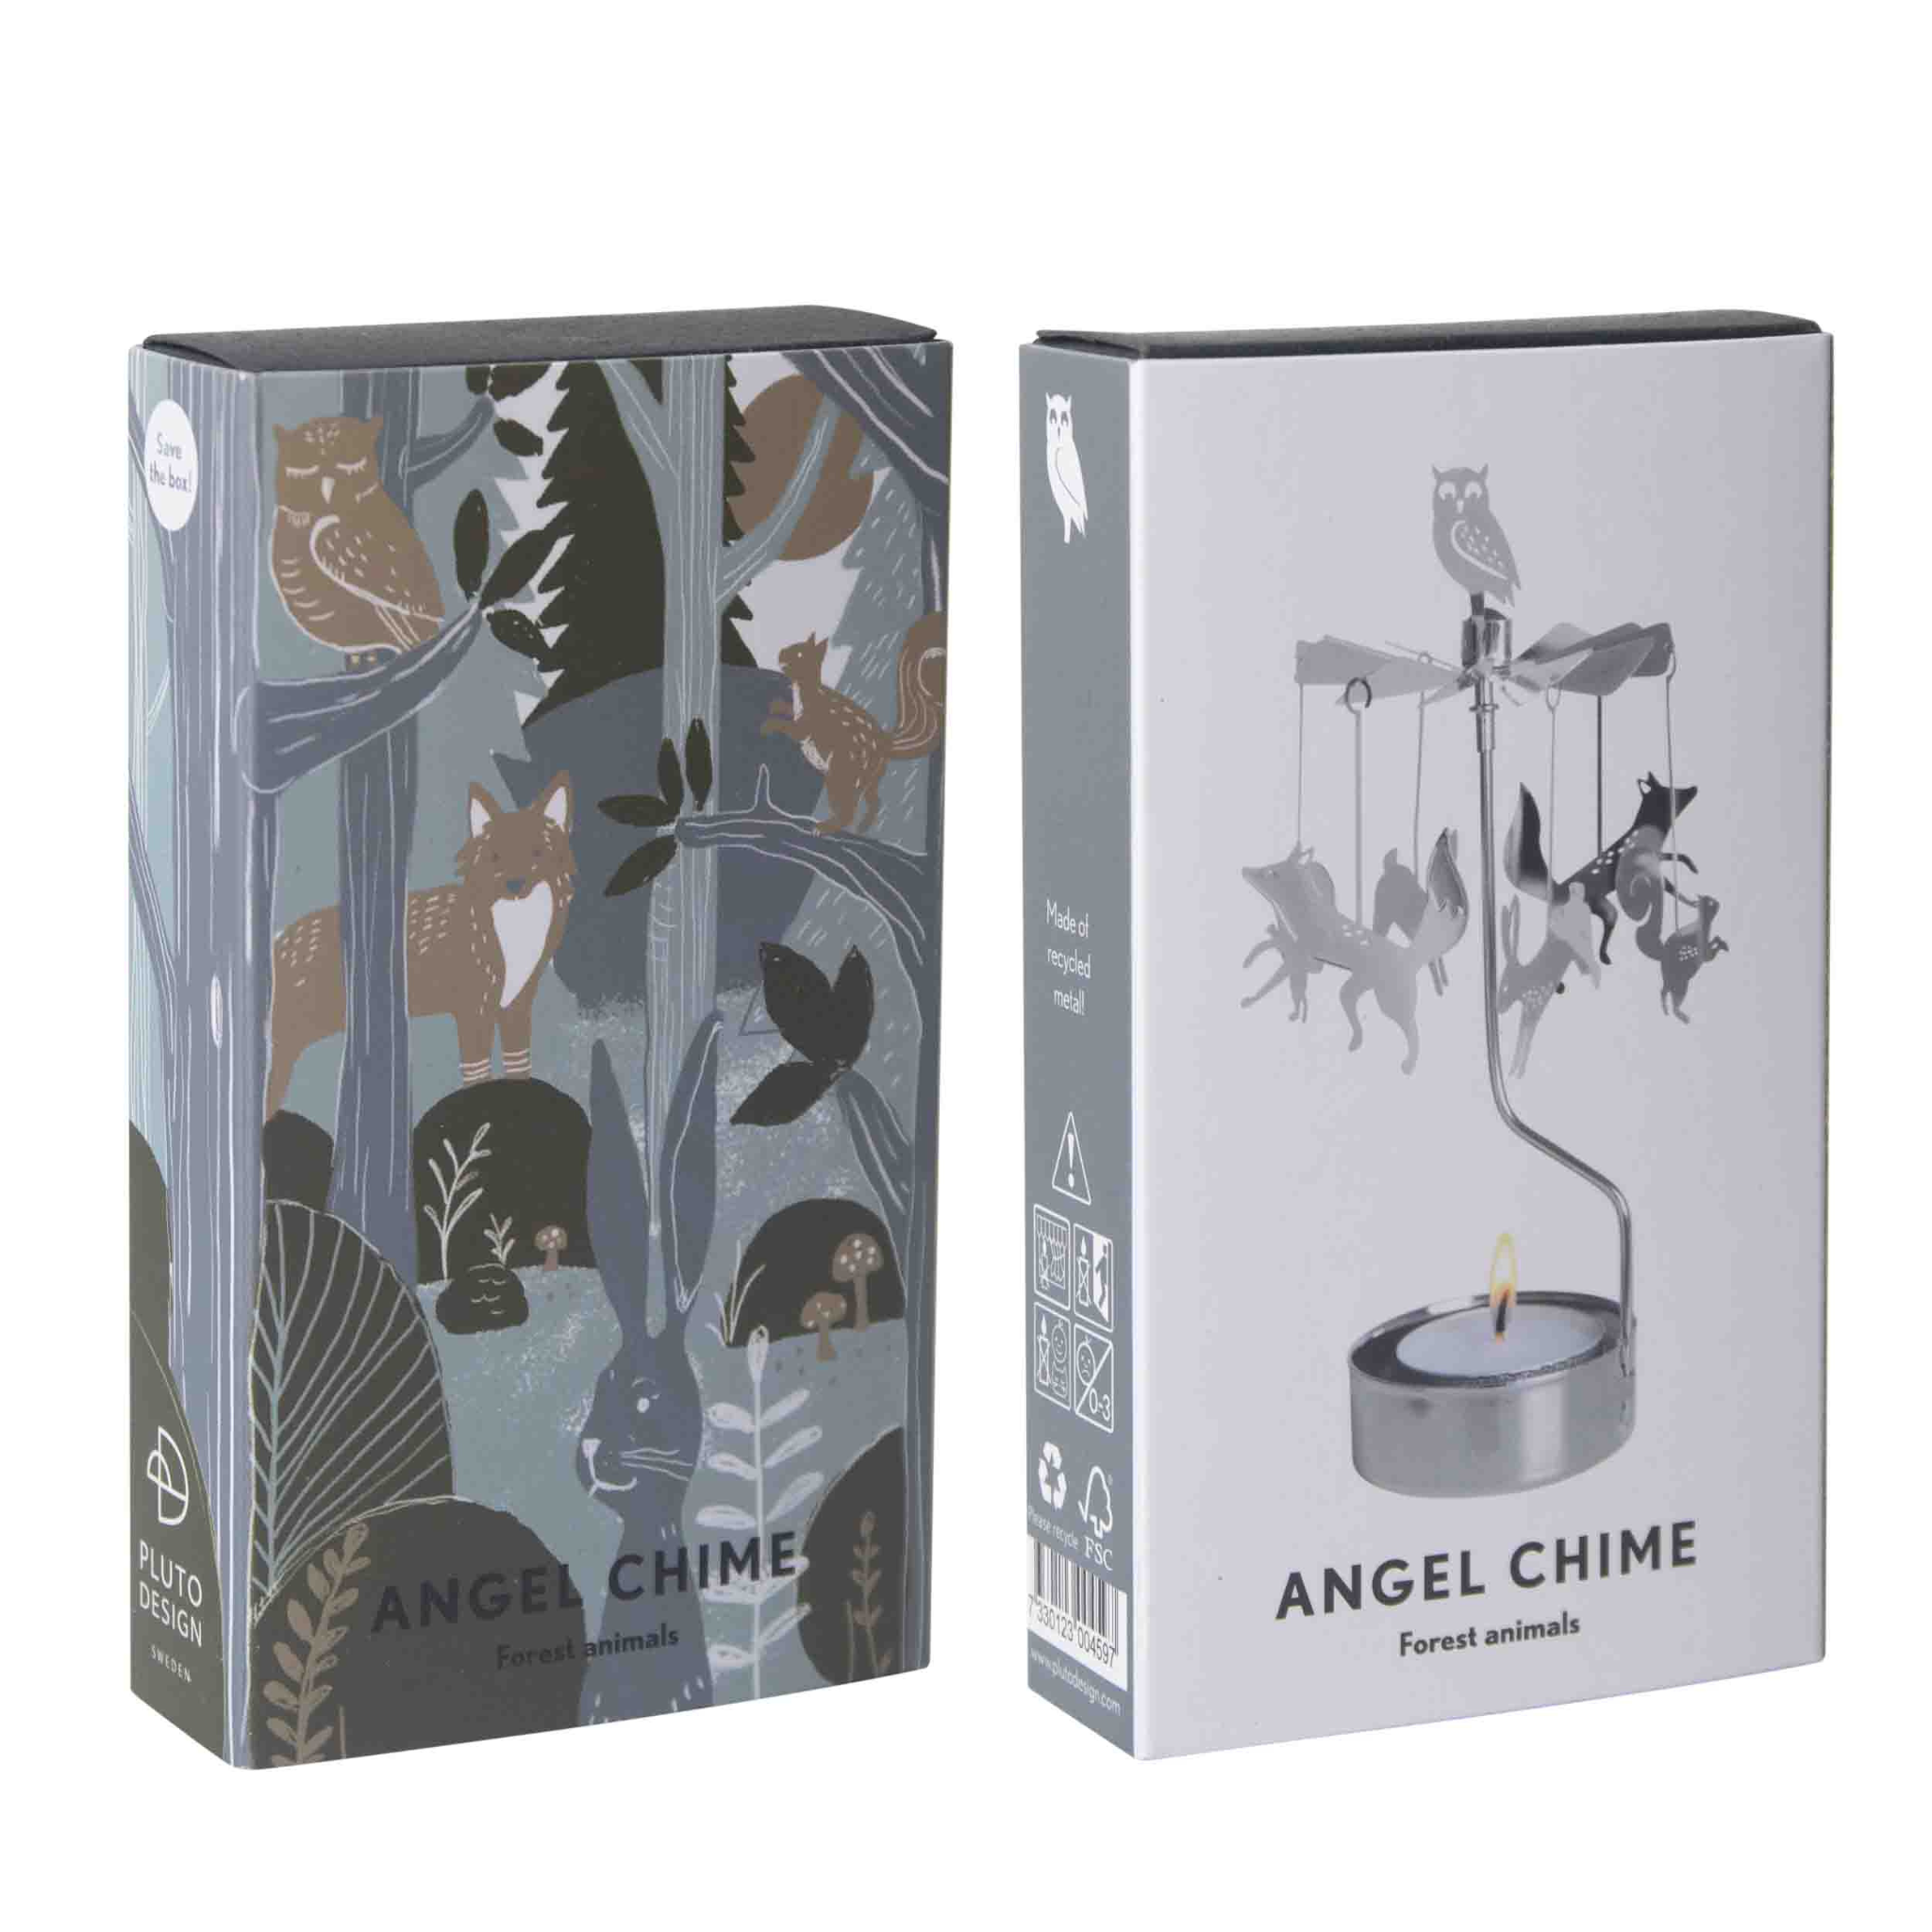 angel chime forest animals box